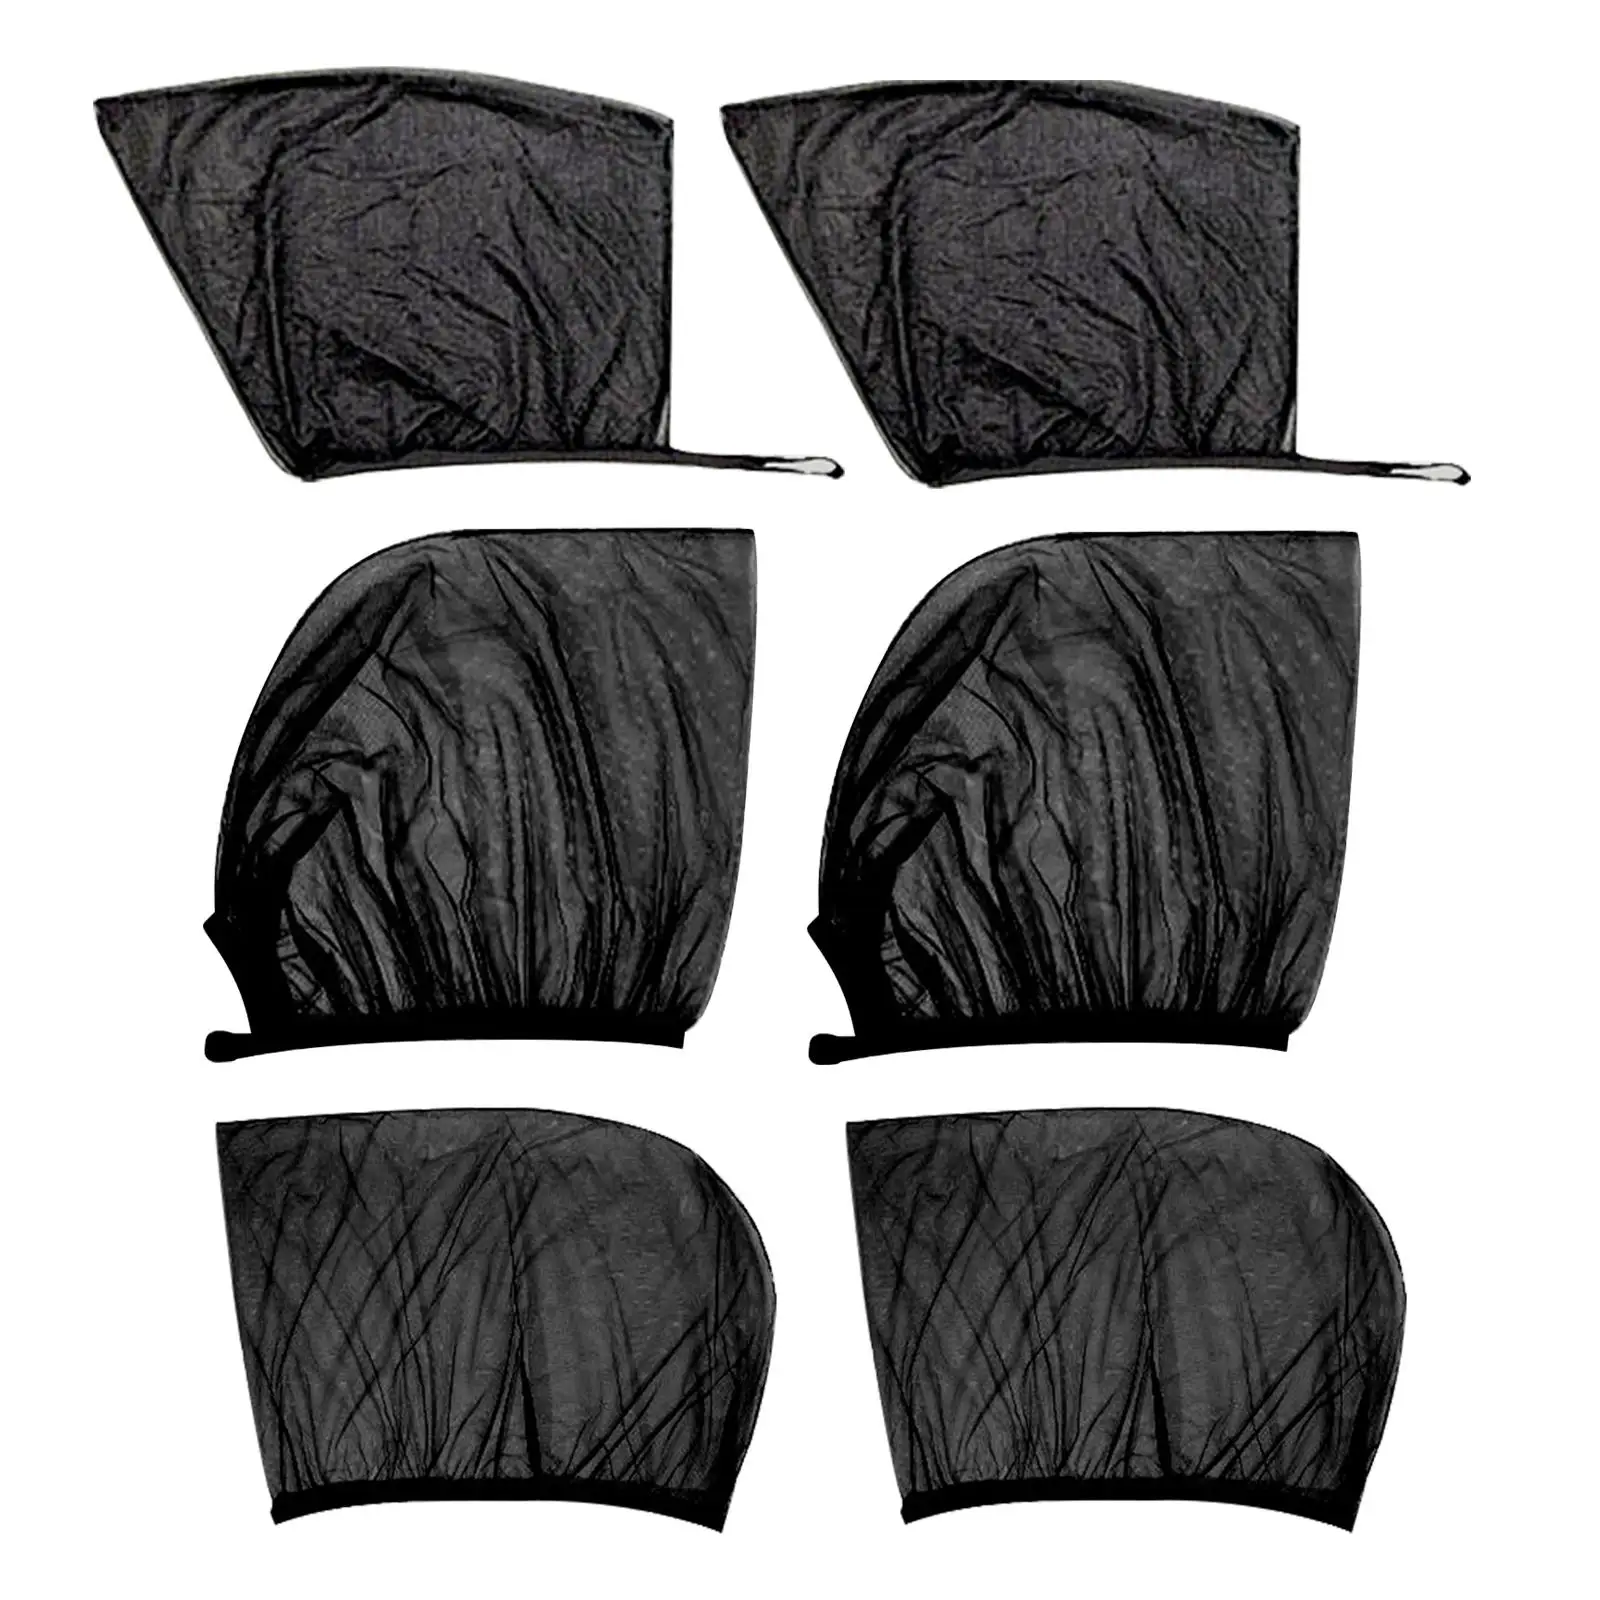 Car Window Shades Auto Car Interior Accessories Mesh Universal Blackout Covers Keep Passengers, Pets and Car Interior Cool